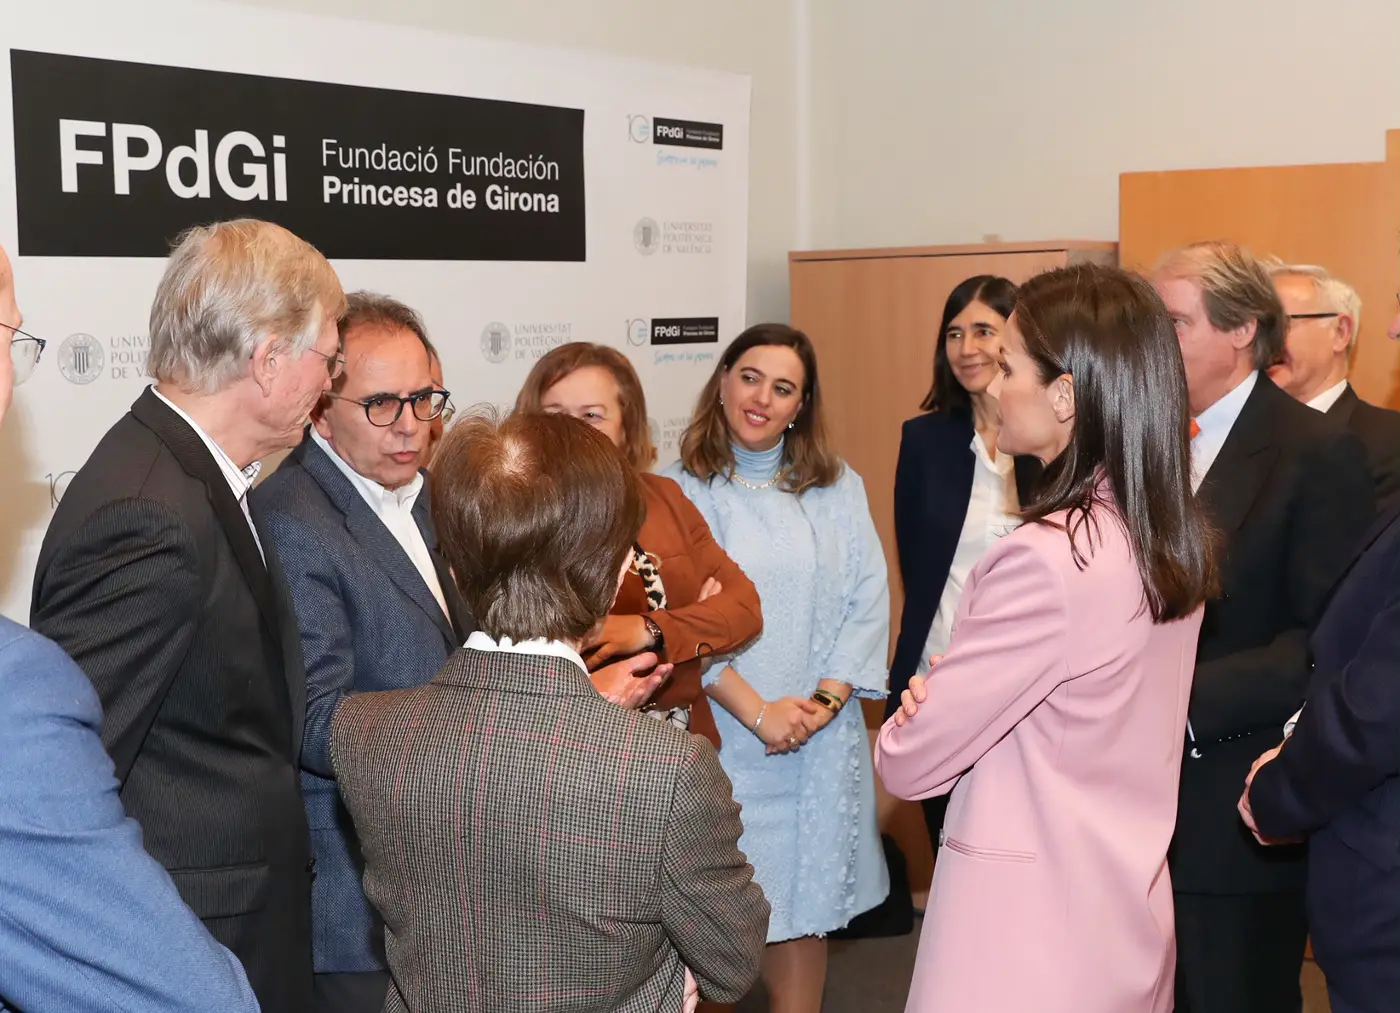 Queen Letizia of Spain annoucnes the winner of Princess of Girona Scientific category awards